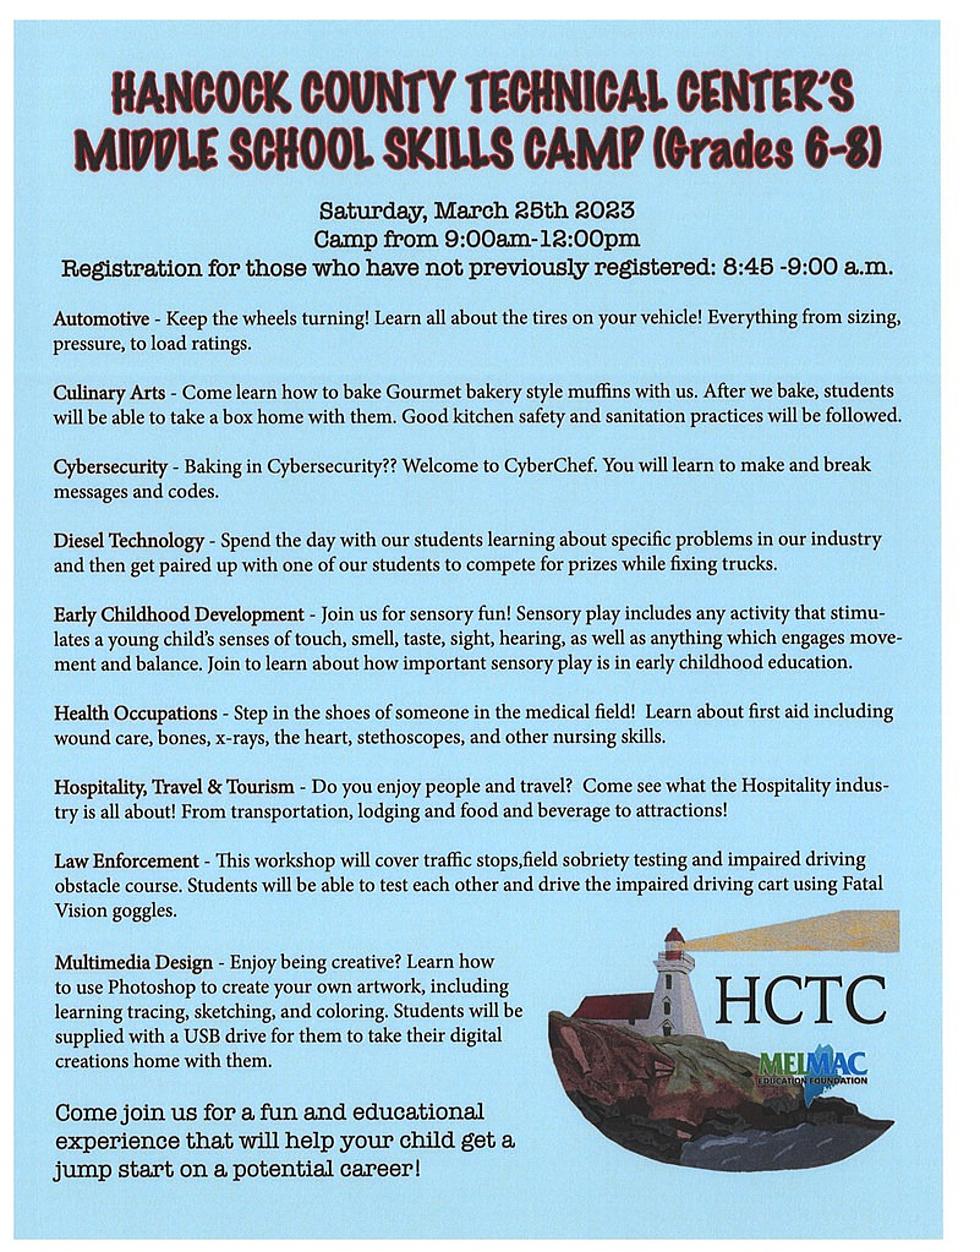 HCTC Offering FREE Middle School Skills Camp Saturday March 25